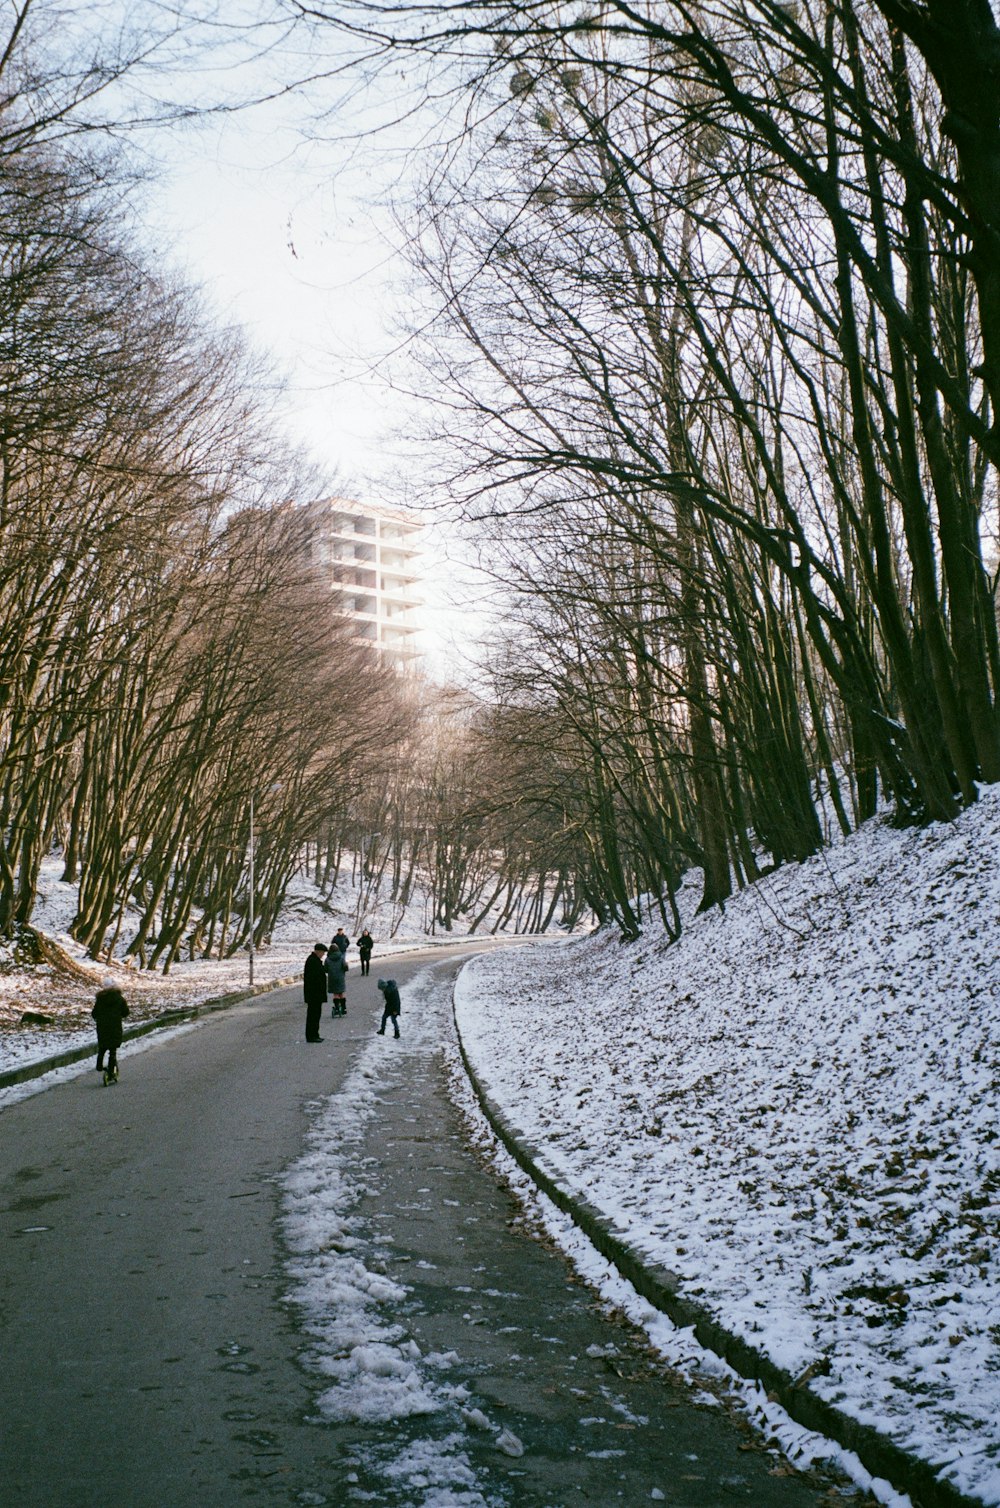 people walking on road between bare trees during daytime